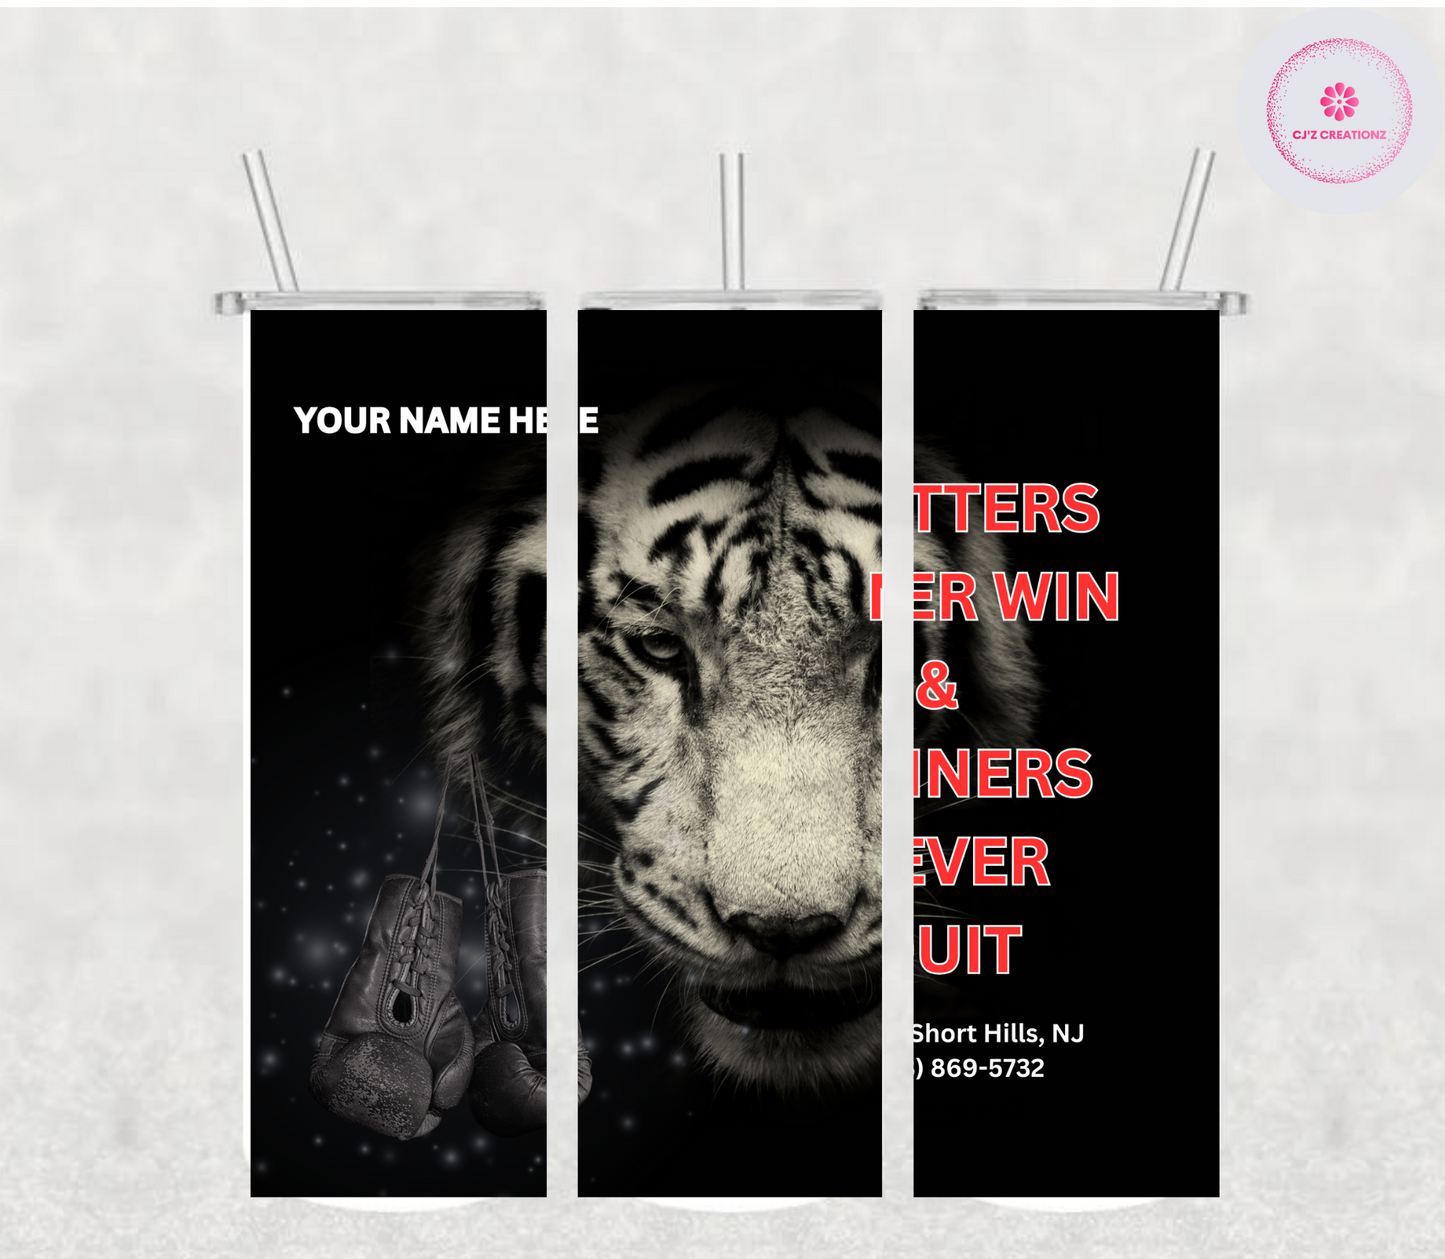 Tiger with Gloves & Quote